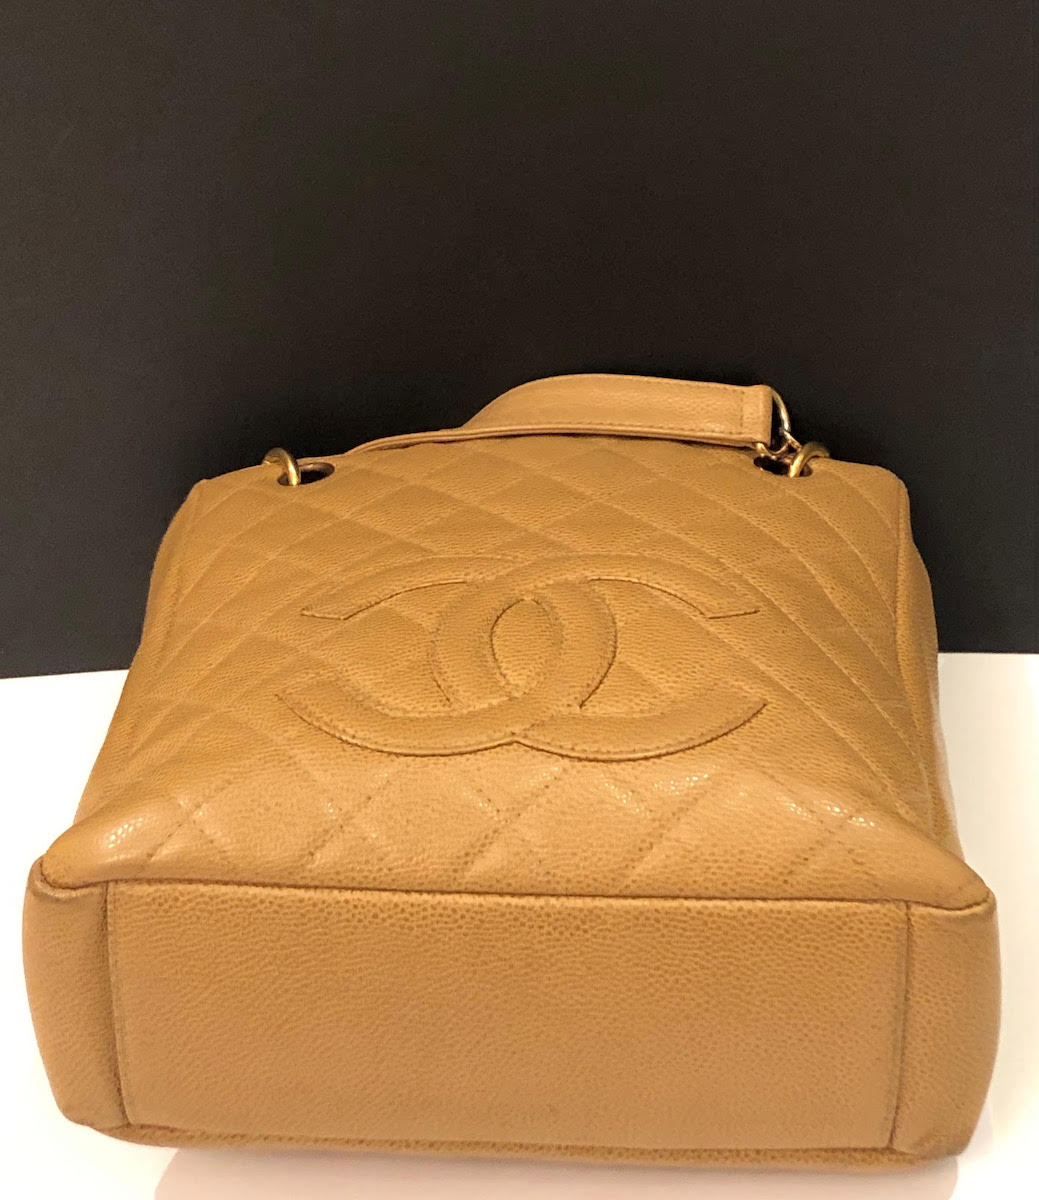 CHANEL Small Petit Shopping Tote Bag Gold Tone Caviar Leather in Camel Beige  Circa 2003 - Chelsea Vintage Couture